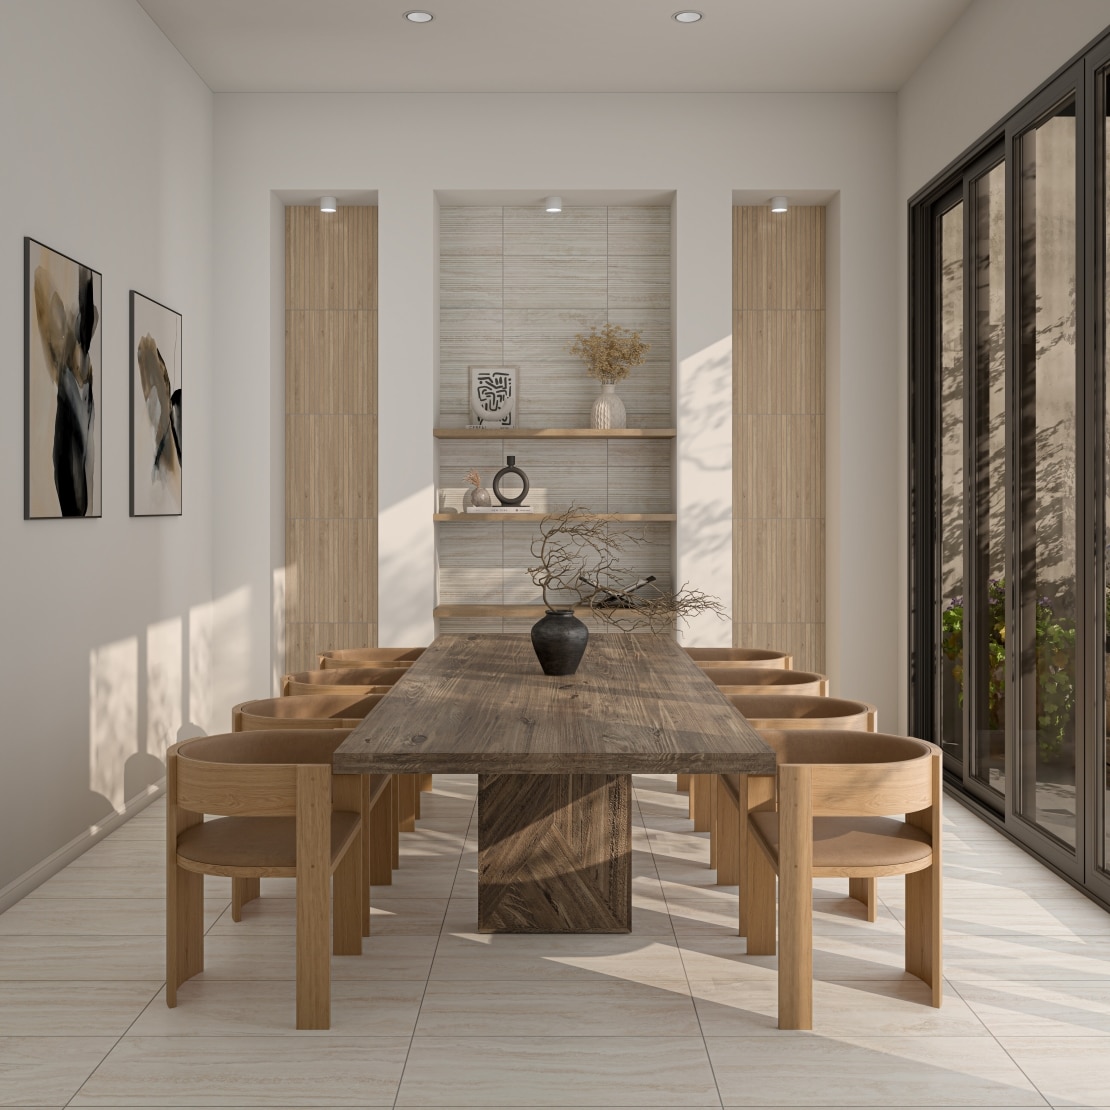 High end dining room with wood accents throughout.